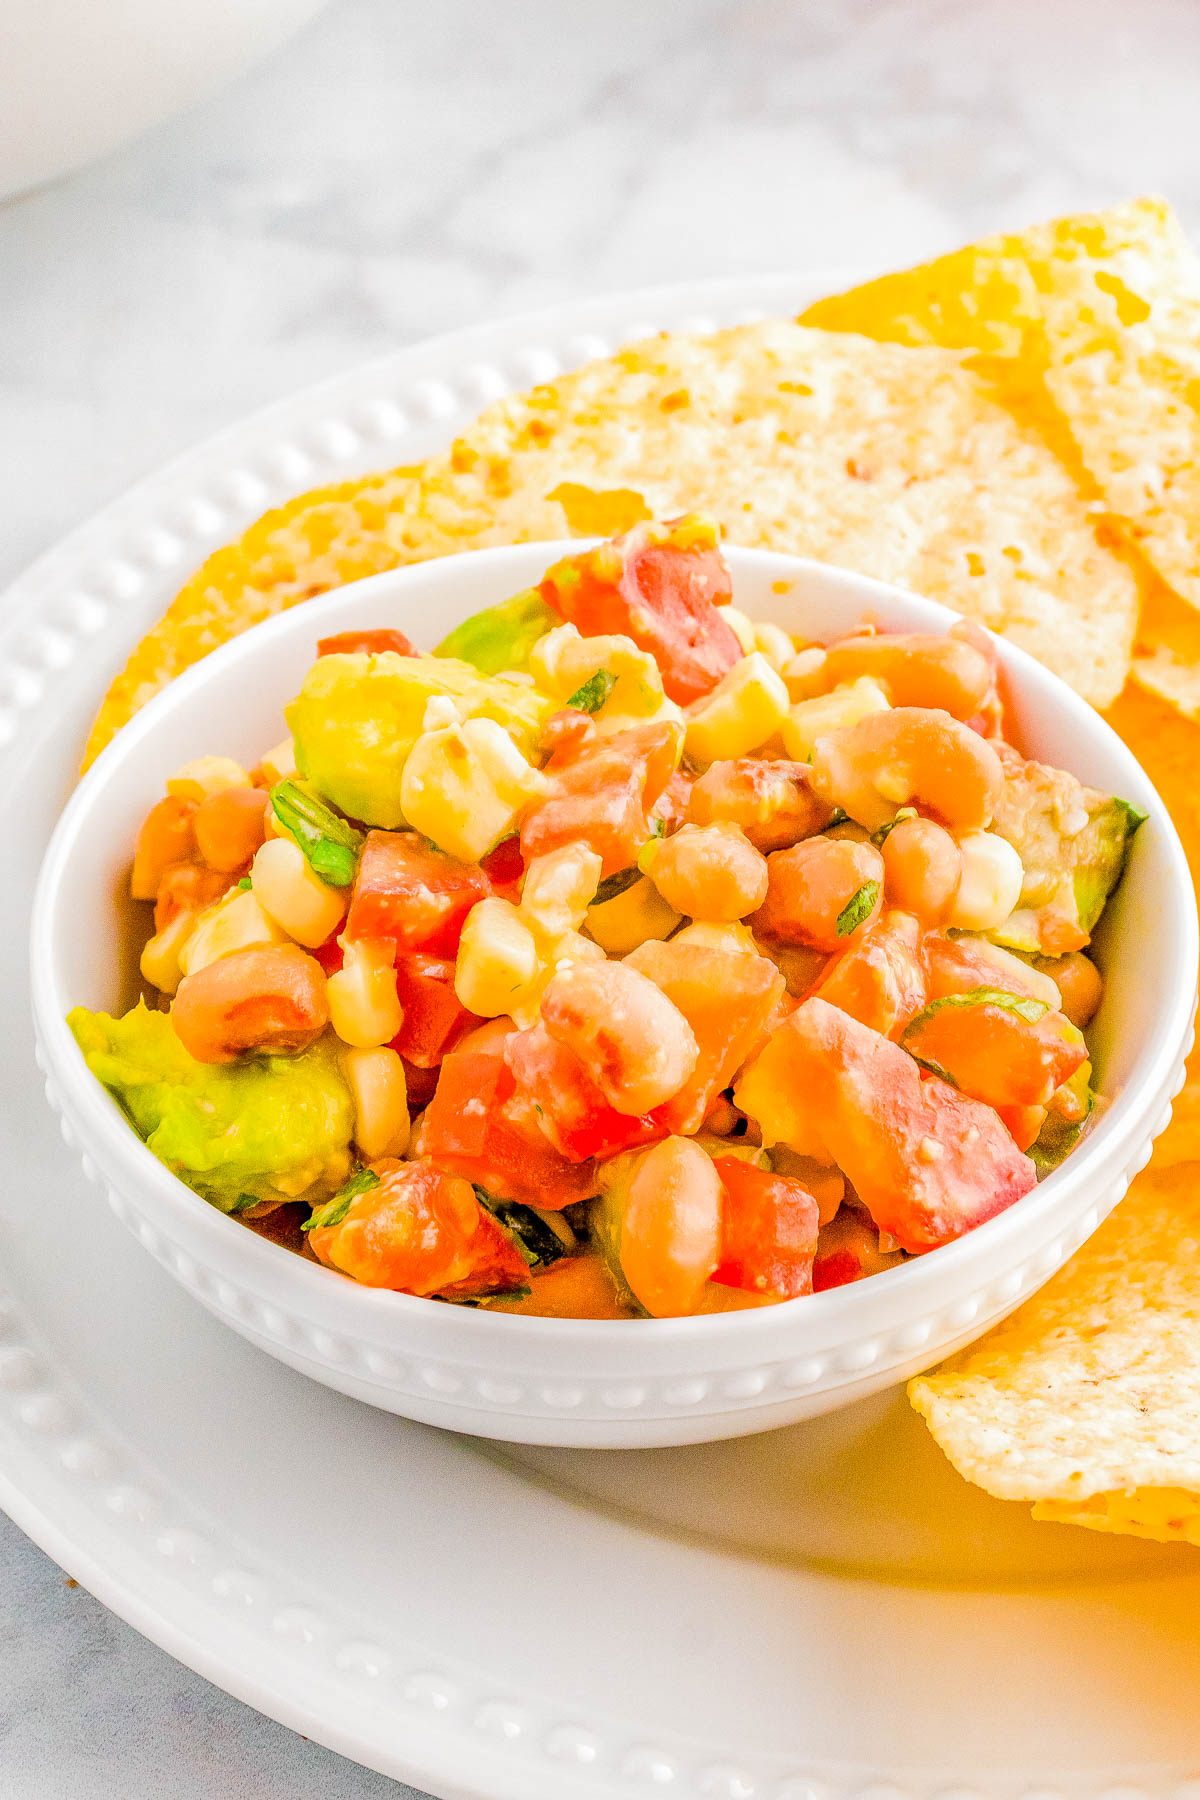 Texas Caviar - You don't need to buy this FAST and EASY crave-worthy appetizer or snack recipe made with Tex-Mex inspired ingredients including black eyed peas, tomatoes, corn, avocado, and a seasoned lime-cumin dressing! Serve it as a dip with tortilla chips at your next backyard barbecue, picnic, game day party, or for a holiday party. It's good luck to eat black eyed peas in the new year!